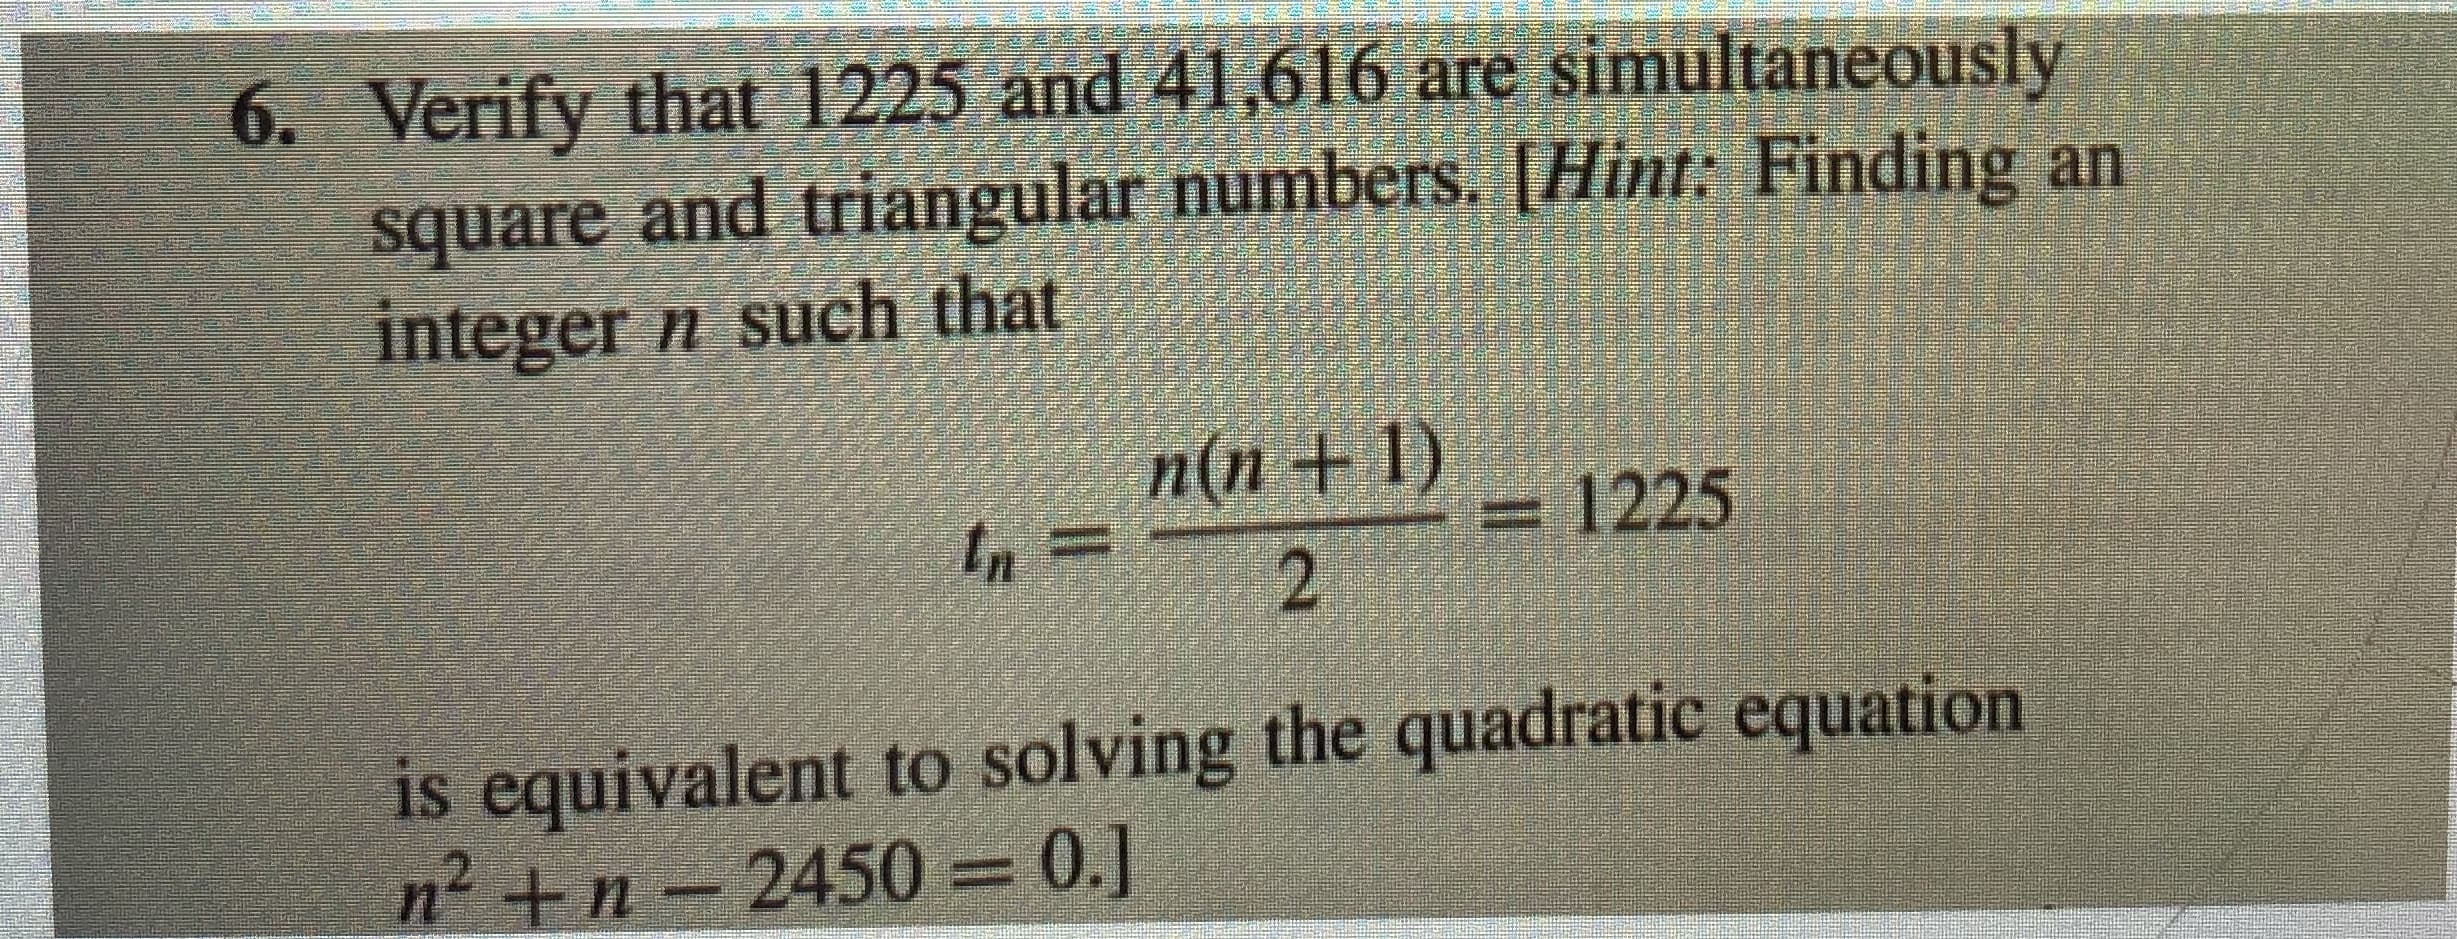 Verify that 1225 and 41,616 are simultaneously
square and triangular numbers. [Hint: Finding an
integer n such that
n(n +1)
in
1225
is equivalent to solving the quadratic equation
n2 +n 2450 0.]
